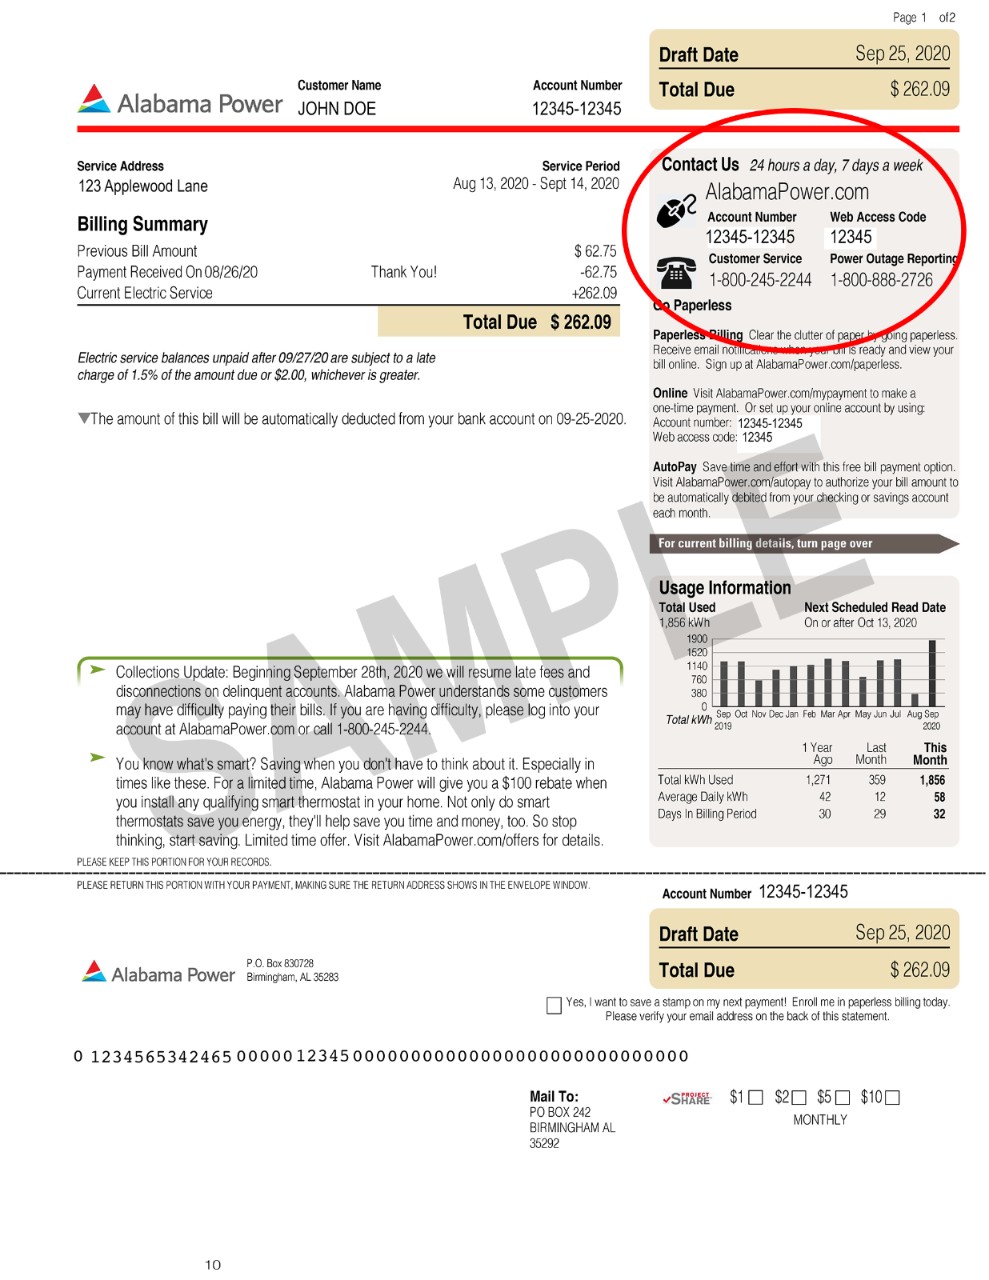 New Electricity Bill Format  - Contact Information - Alabama Power Company